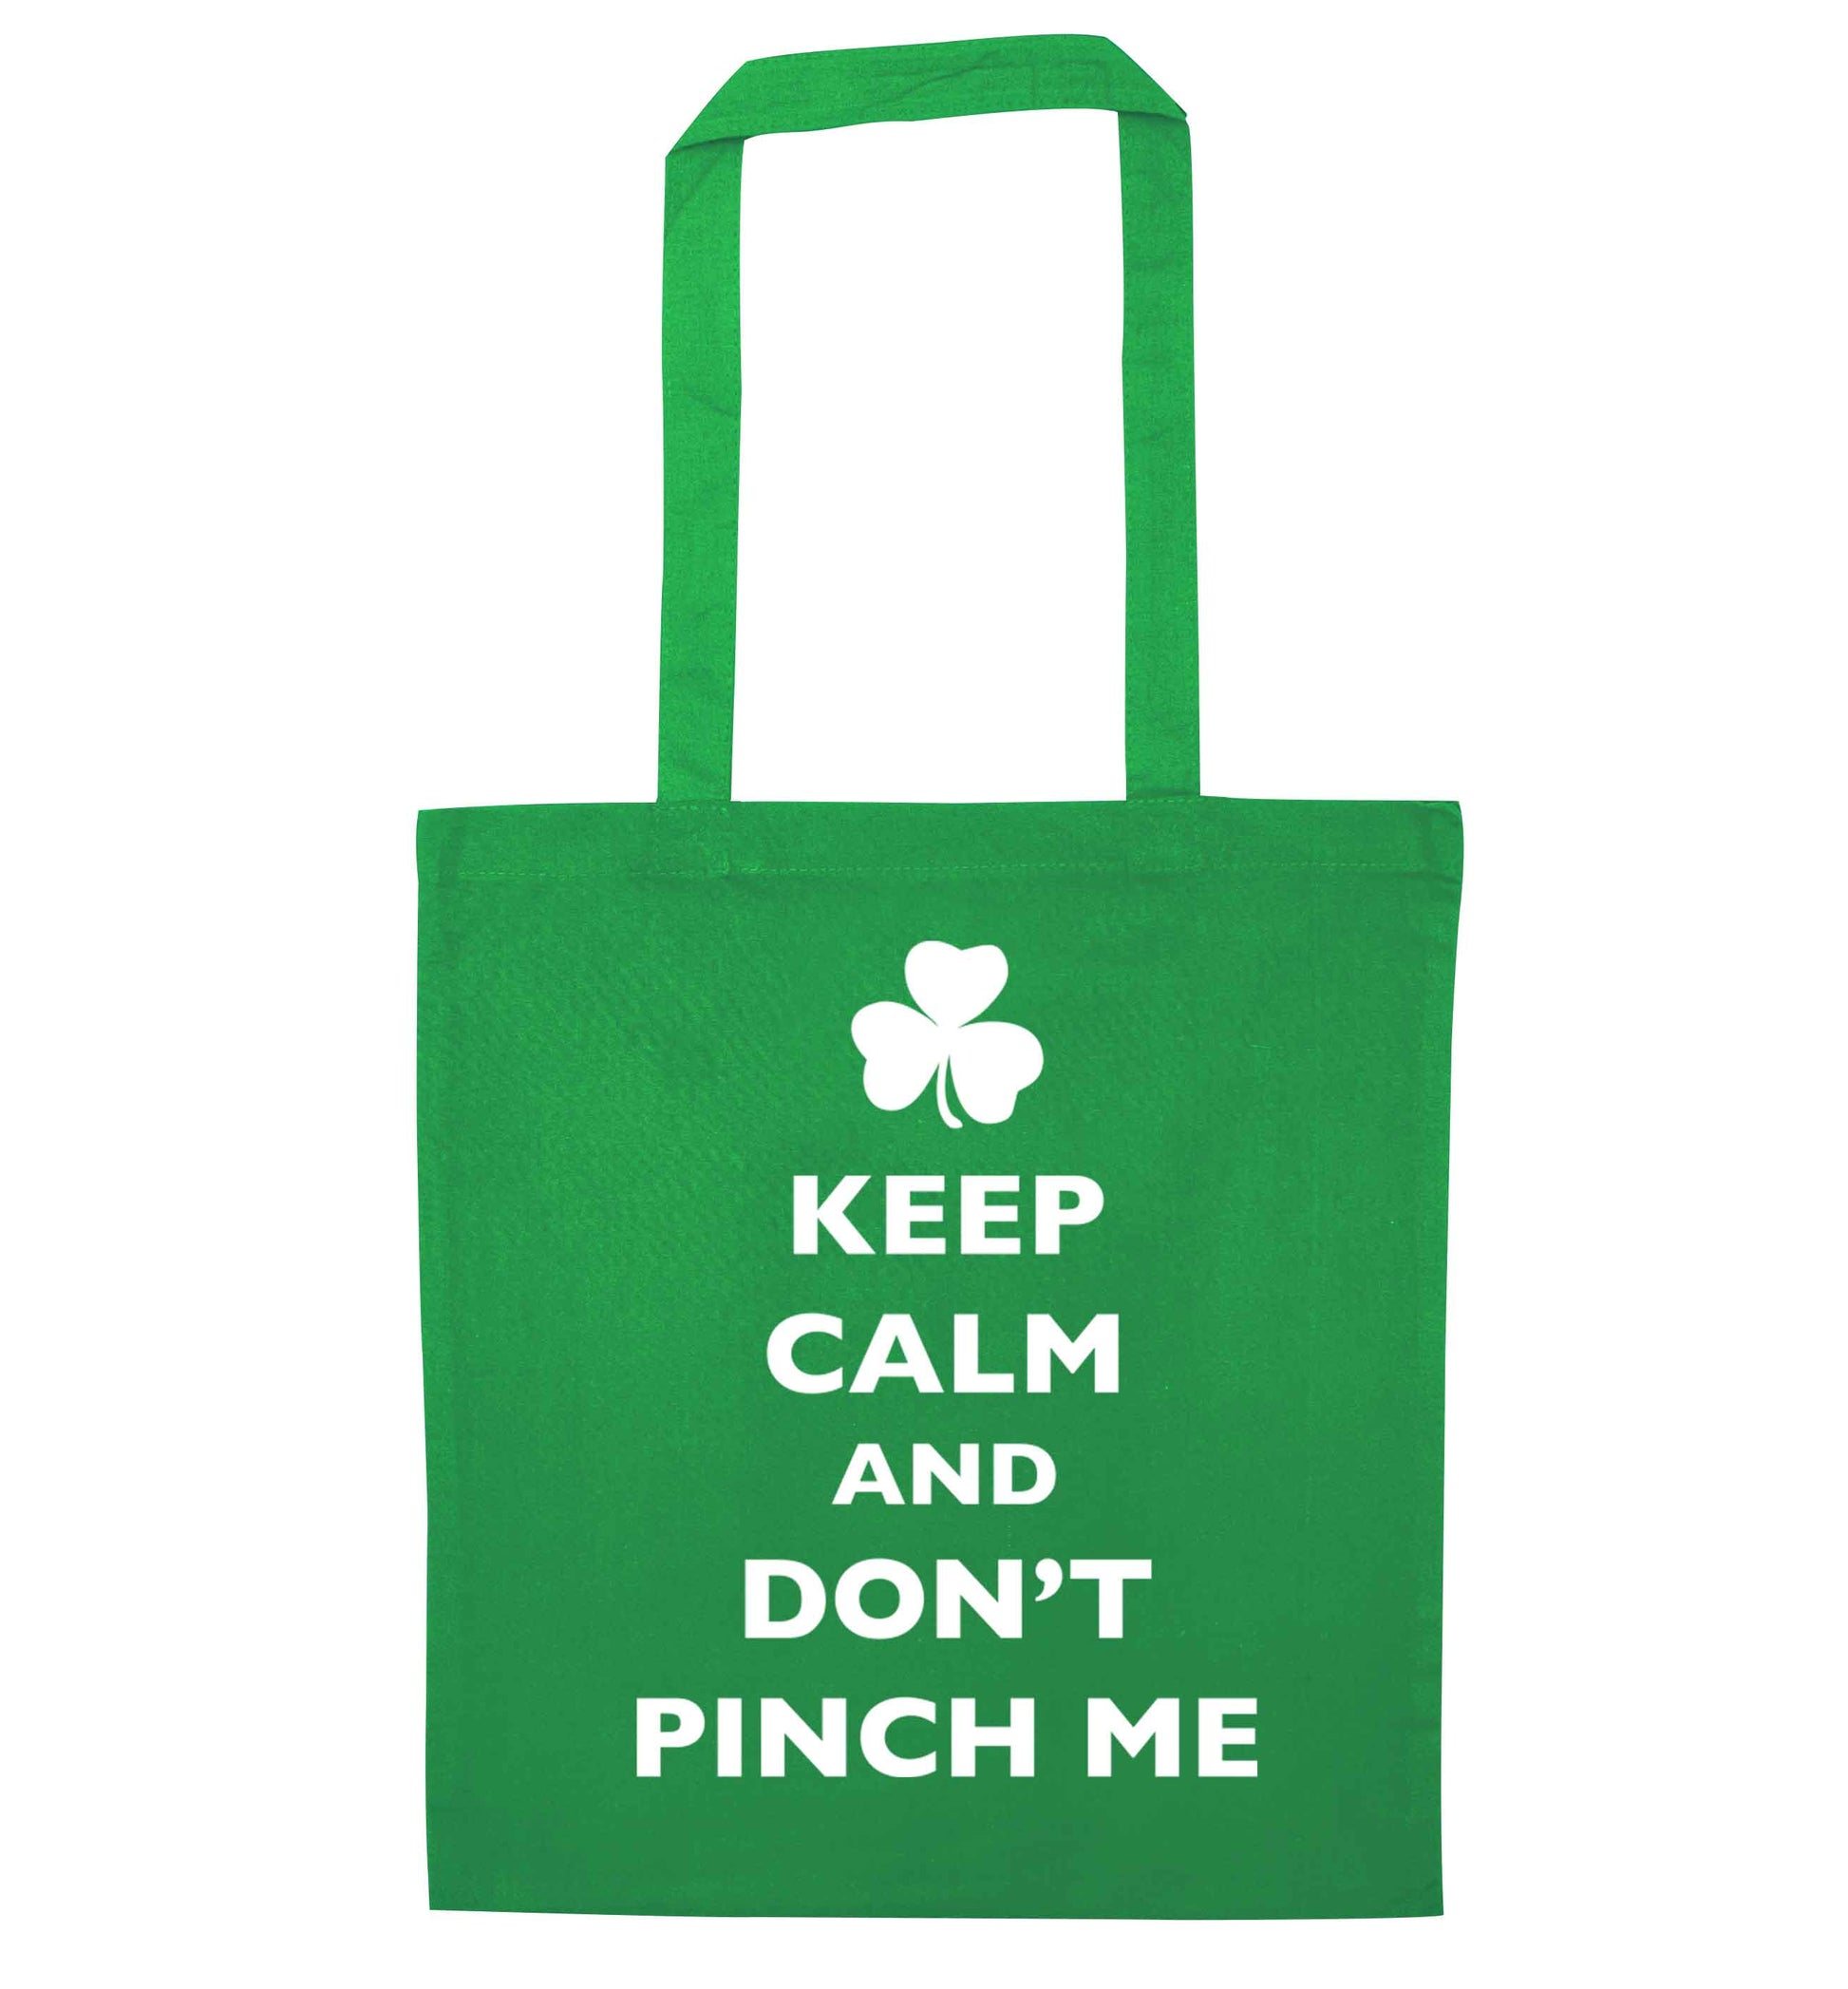 Keep calm and don't pinch me green tote bag